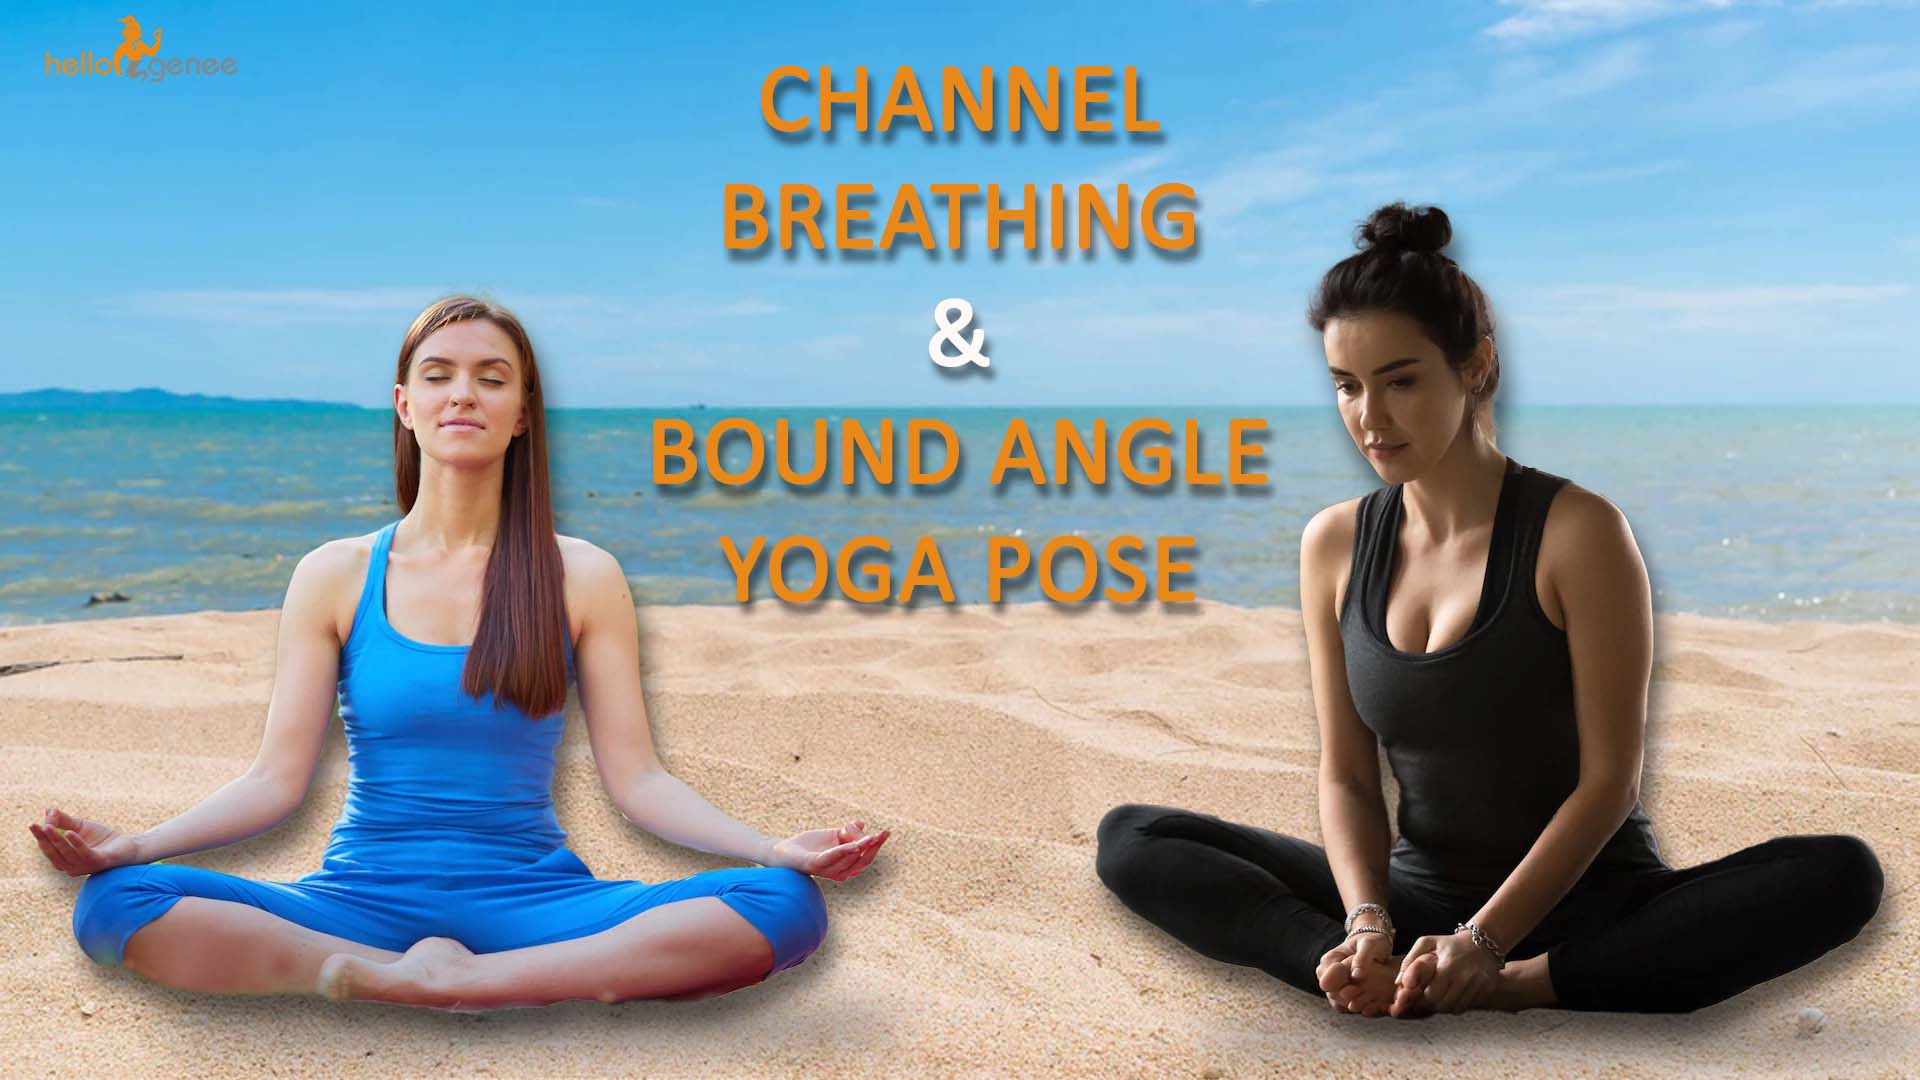 Supported Reclined Bound Angle Posture - Sacred Moves